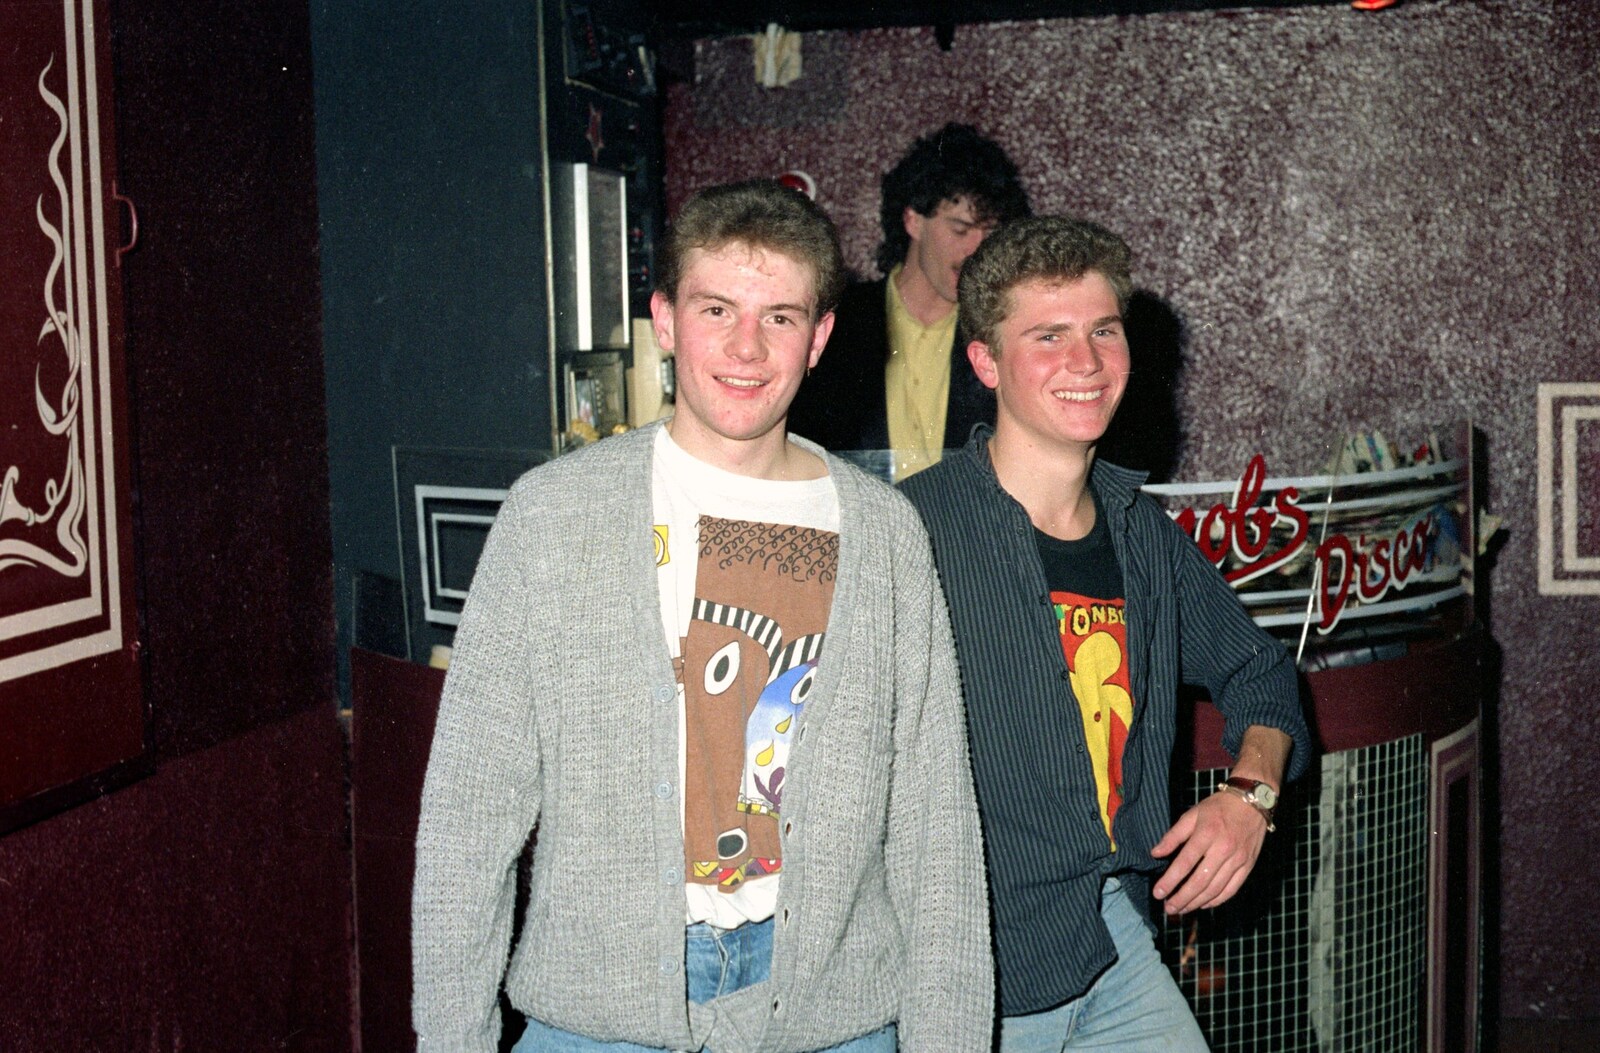 Malc and his mate by the DJ booth from Uni: A Party in Snobs Nightclub, Mayflower Street, Plymouth - 18th October 1986